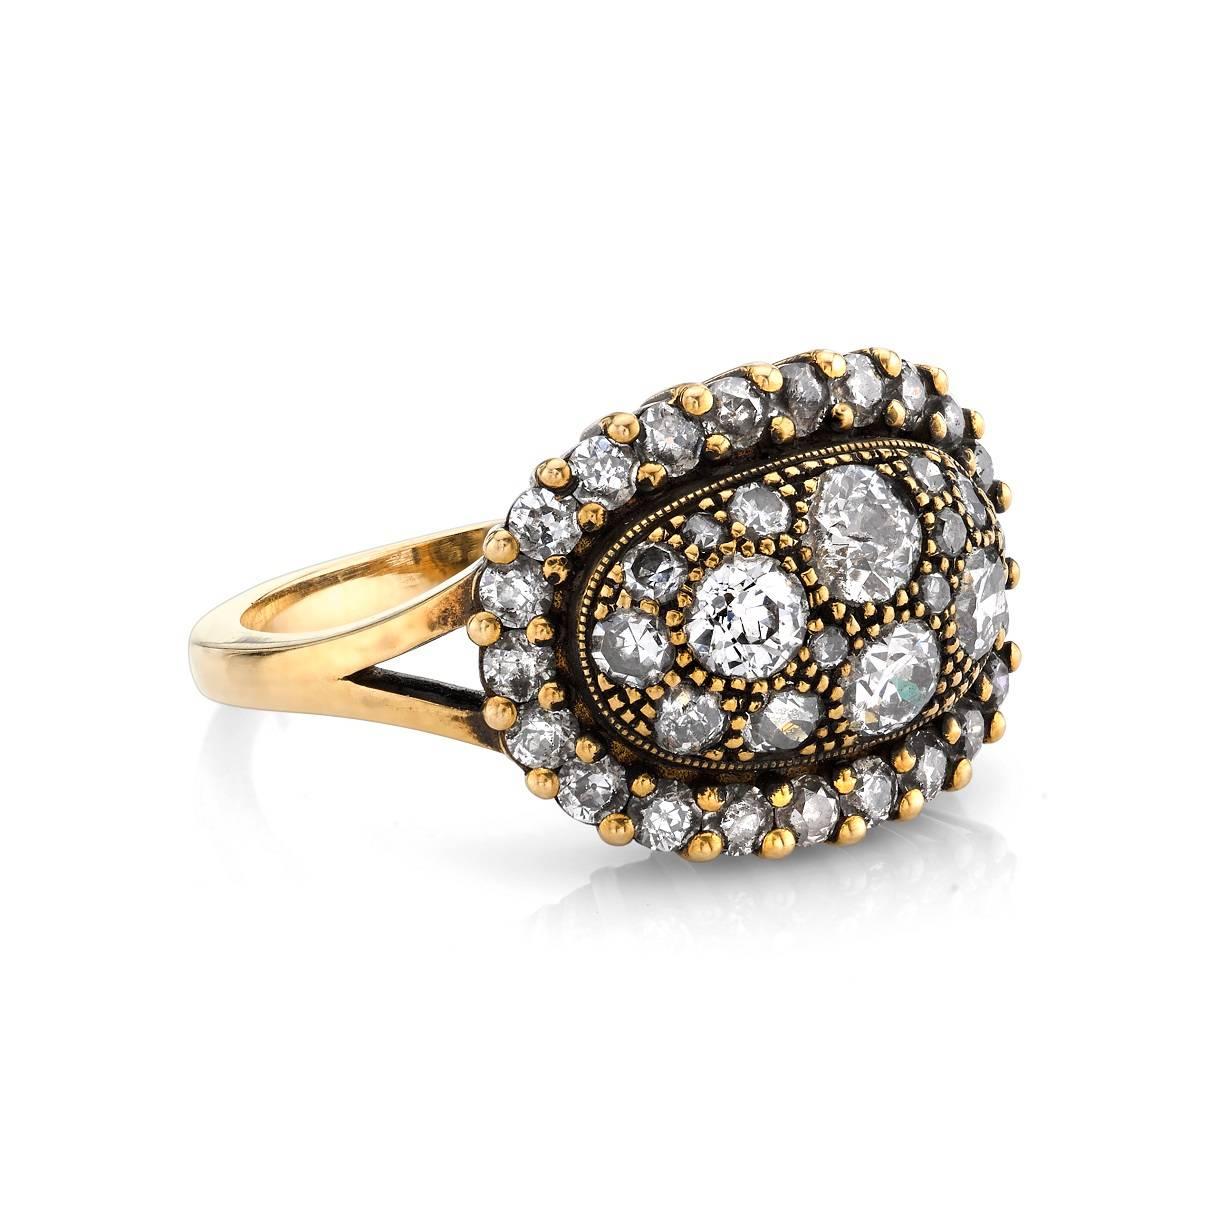 1.40ctw old European, old Mine, Round Brilliant, Single cut and vintage Cushion cut diamonds set in hand crafted 18K oxidized yellow gold mounting. 